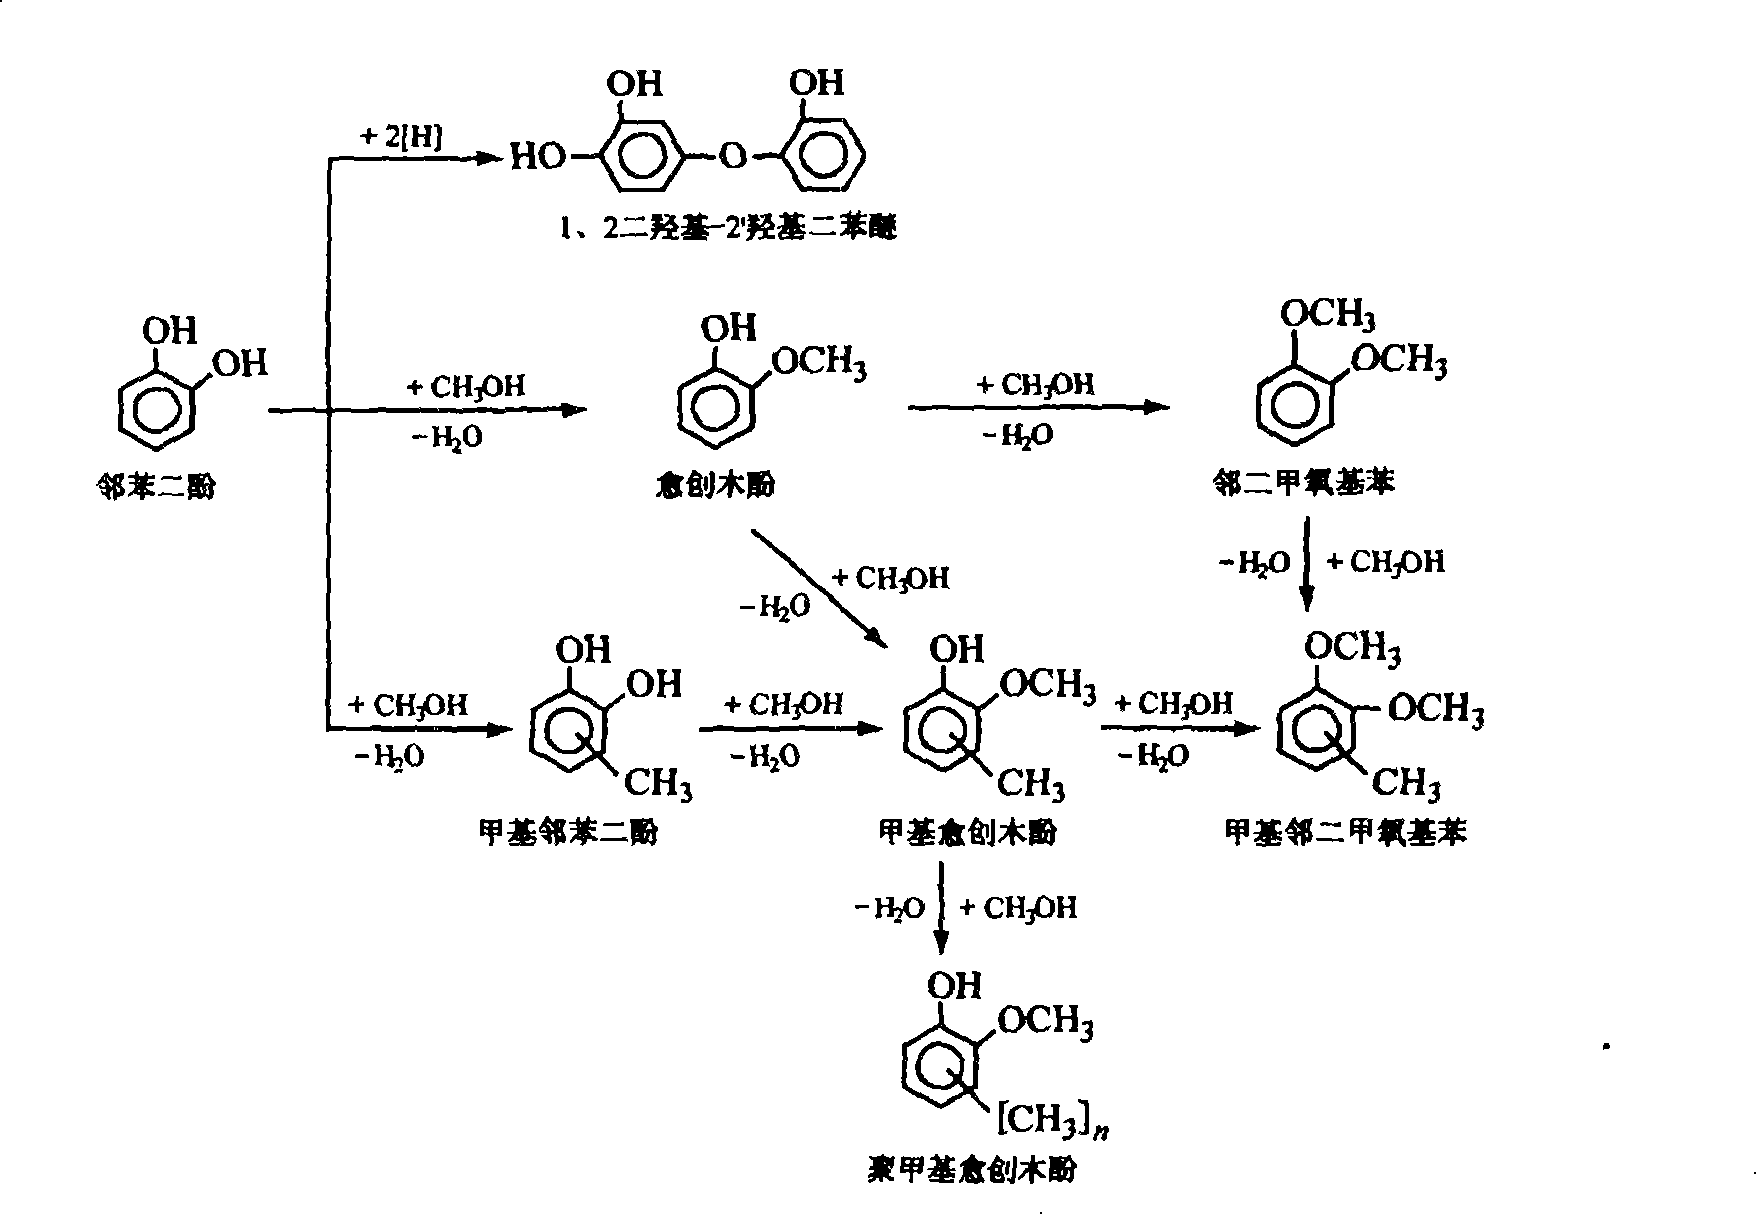 Method for synthesizing guaiacol